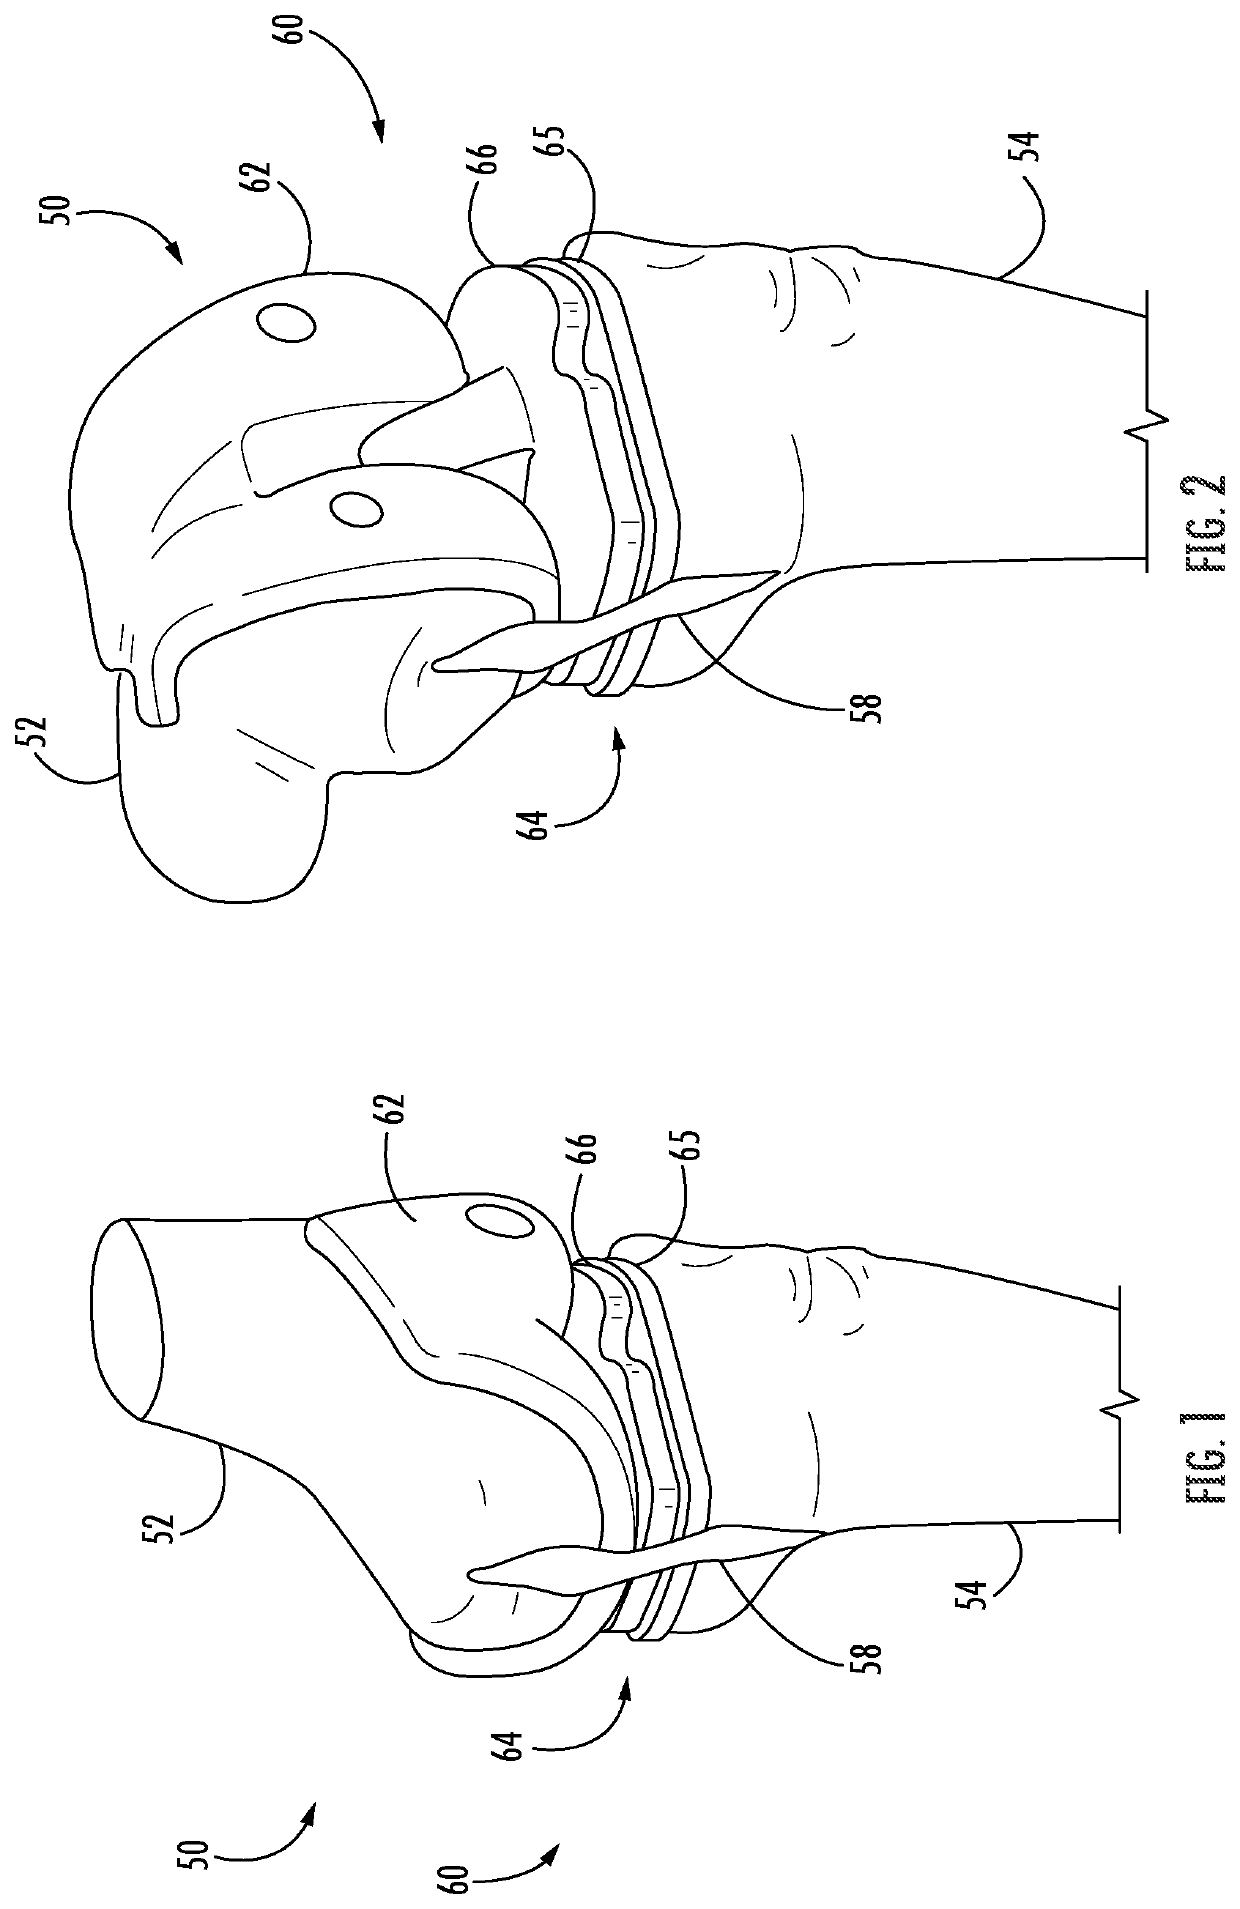 Methods and instrumentation for balancing of ligaments in flexion